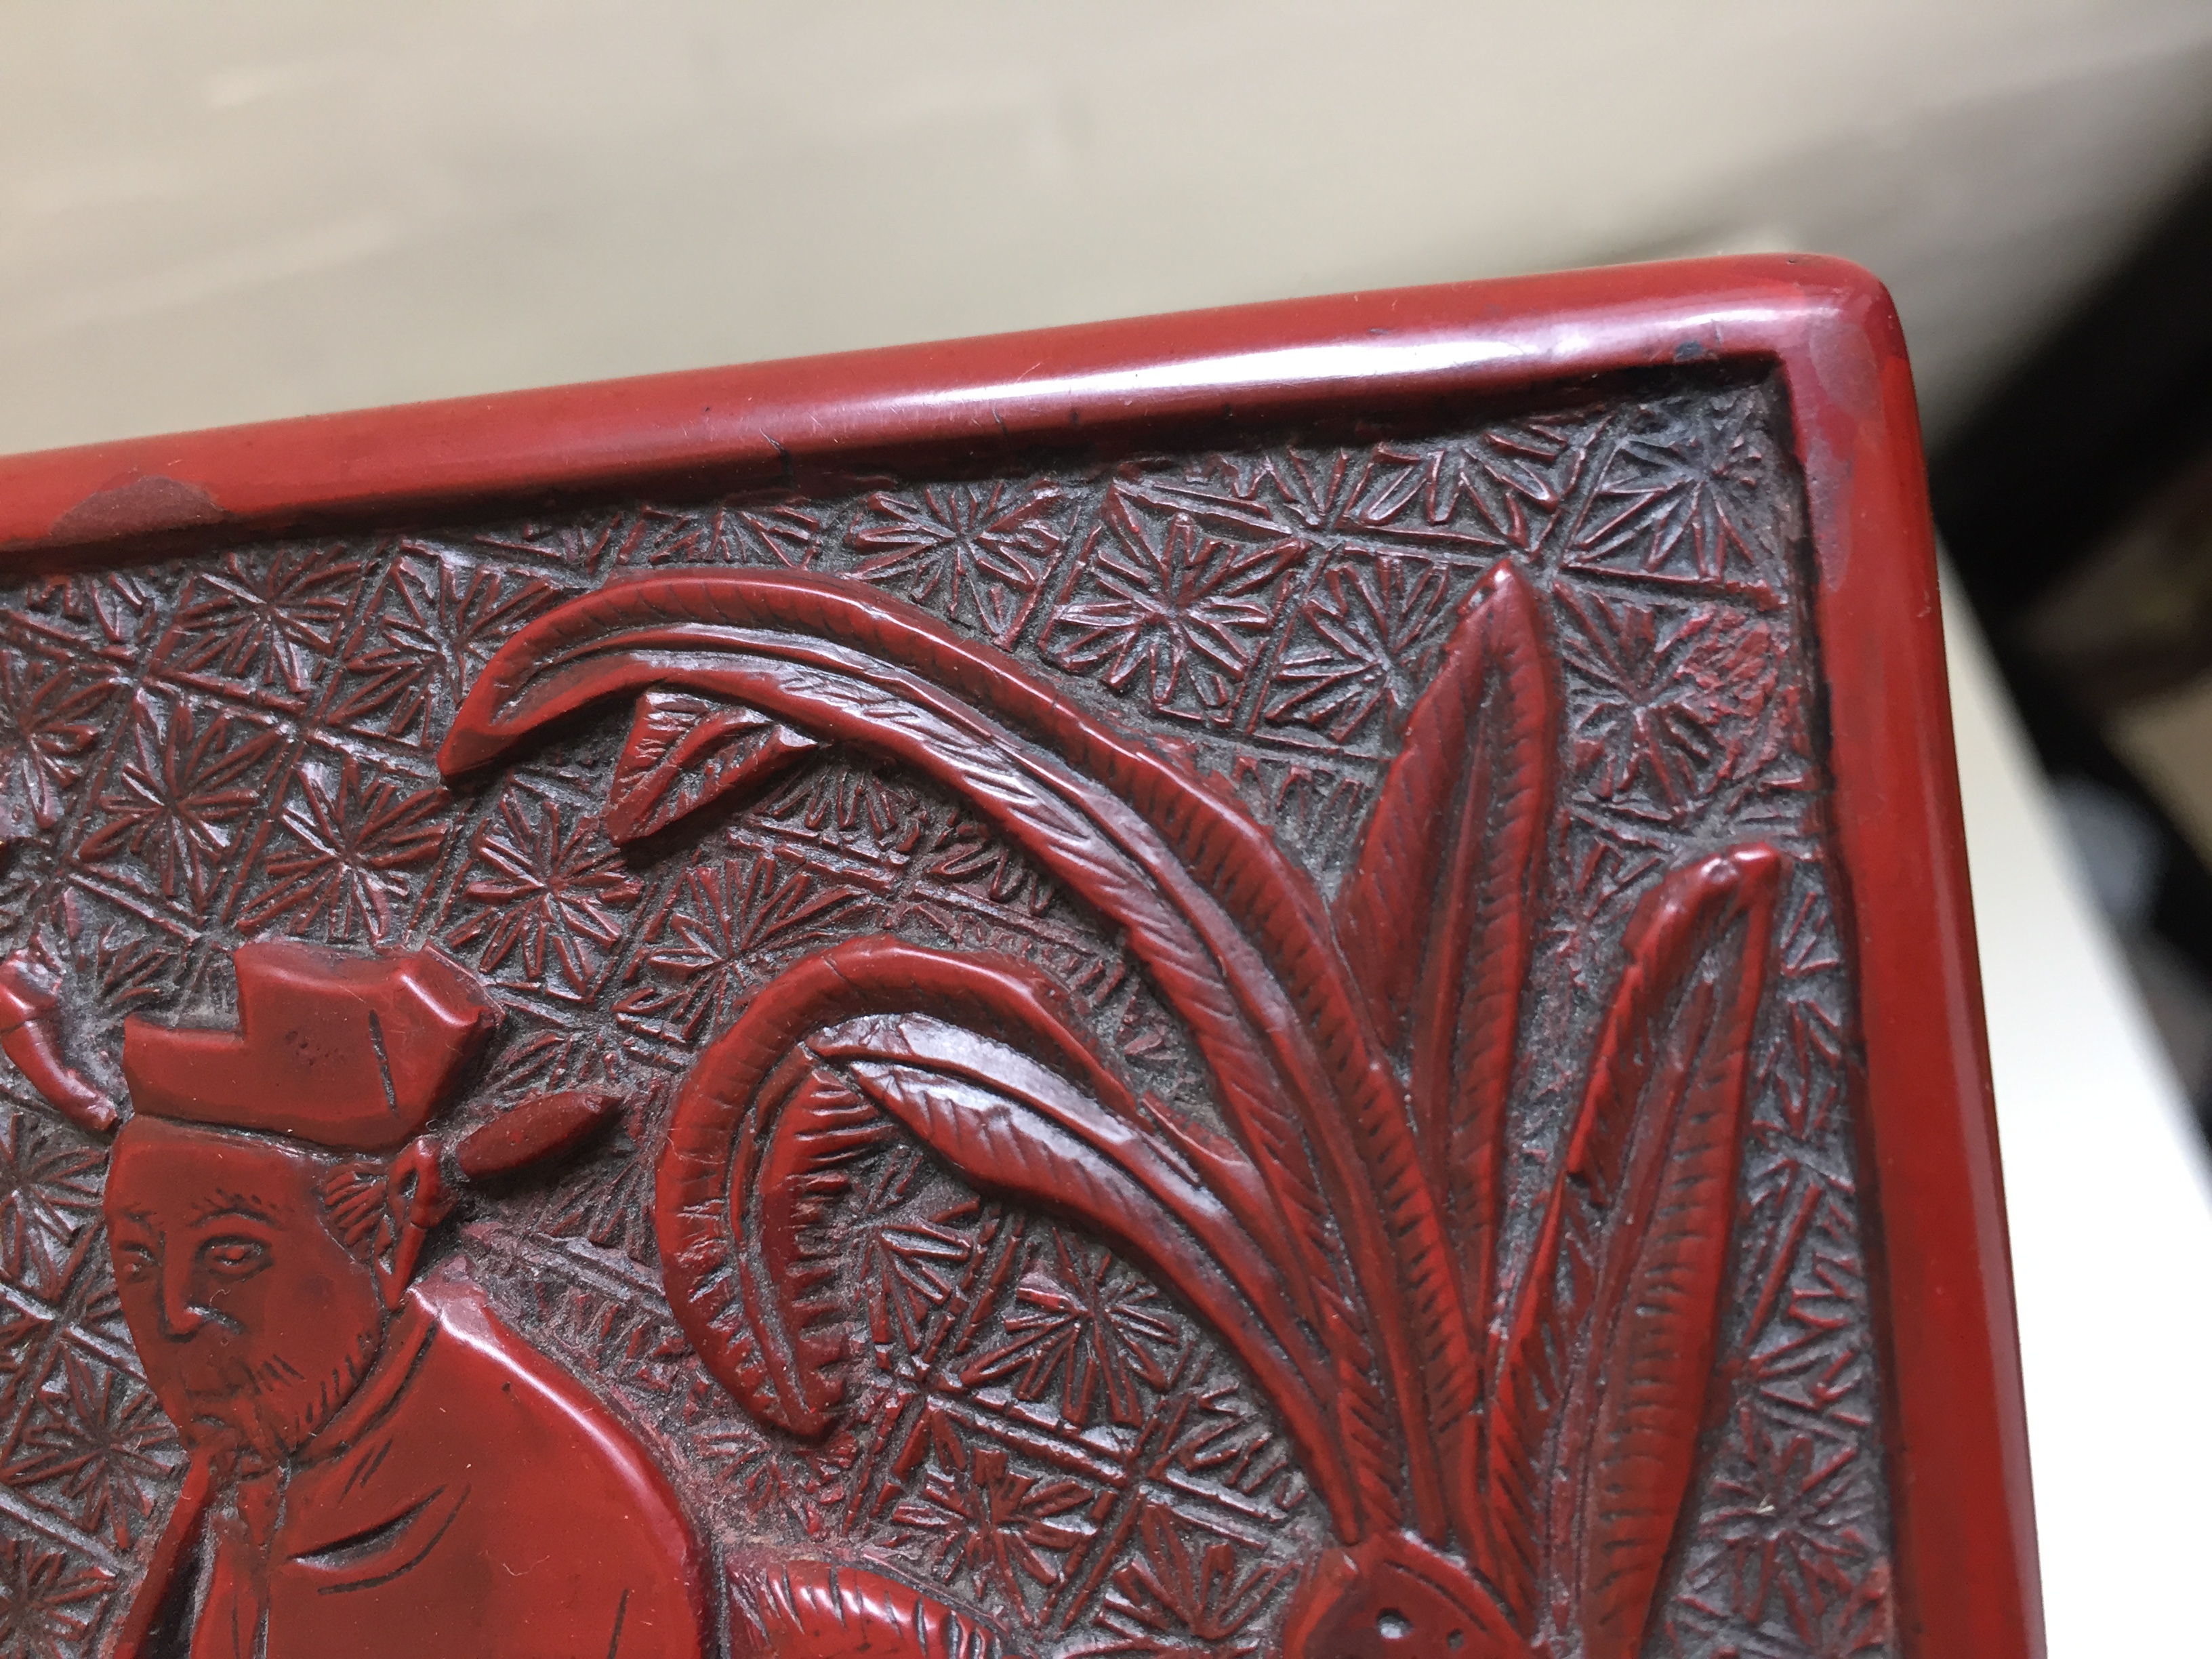 A CHINESE CINNABAR LACQUER 'MUSICIAN' BOX AND COVER 晚明 剔紅圖高士行樂圖紋蓋盒 - Image 5 of 20